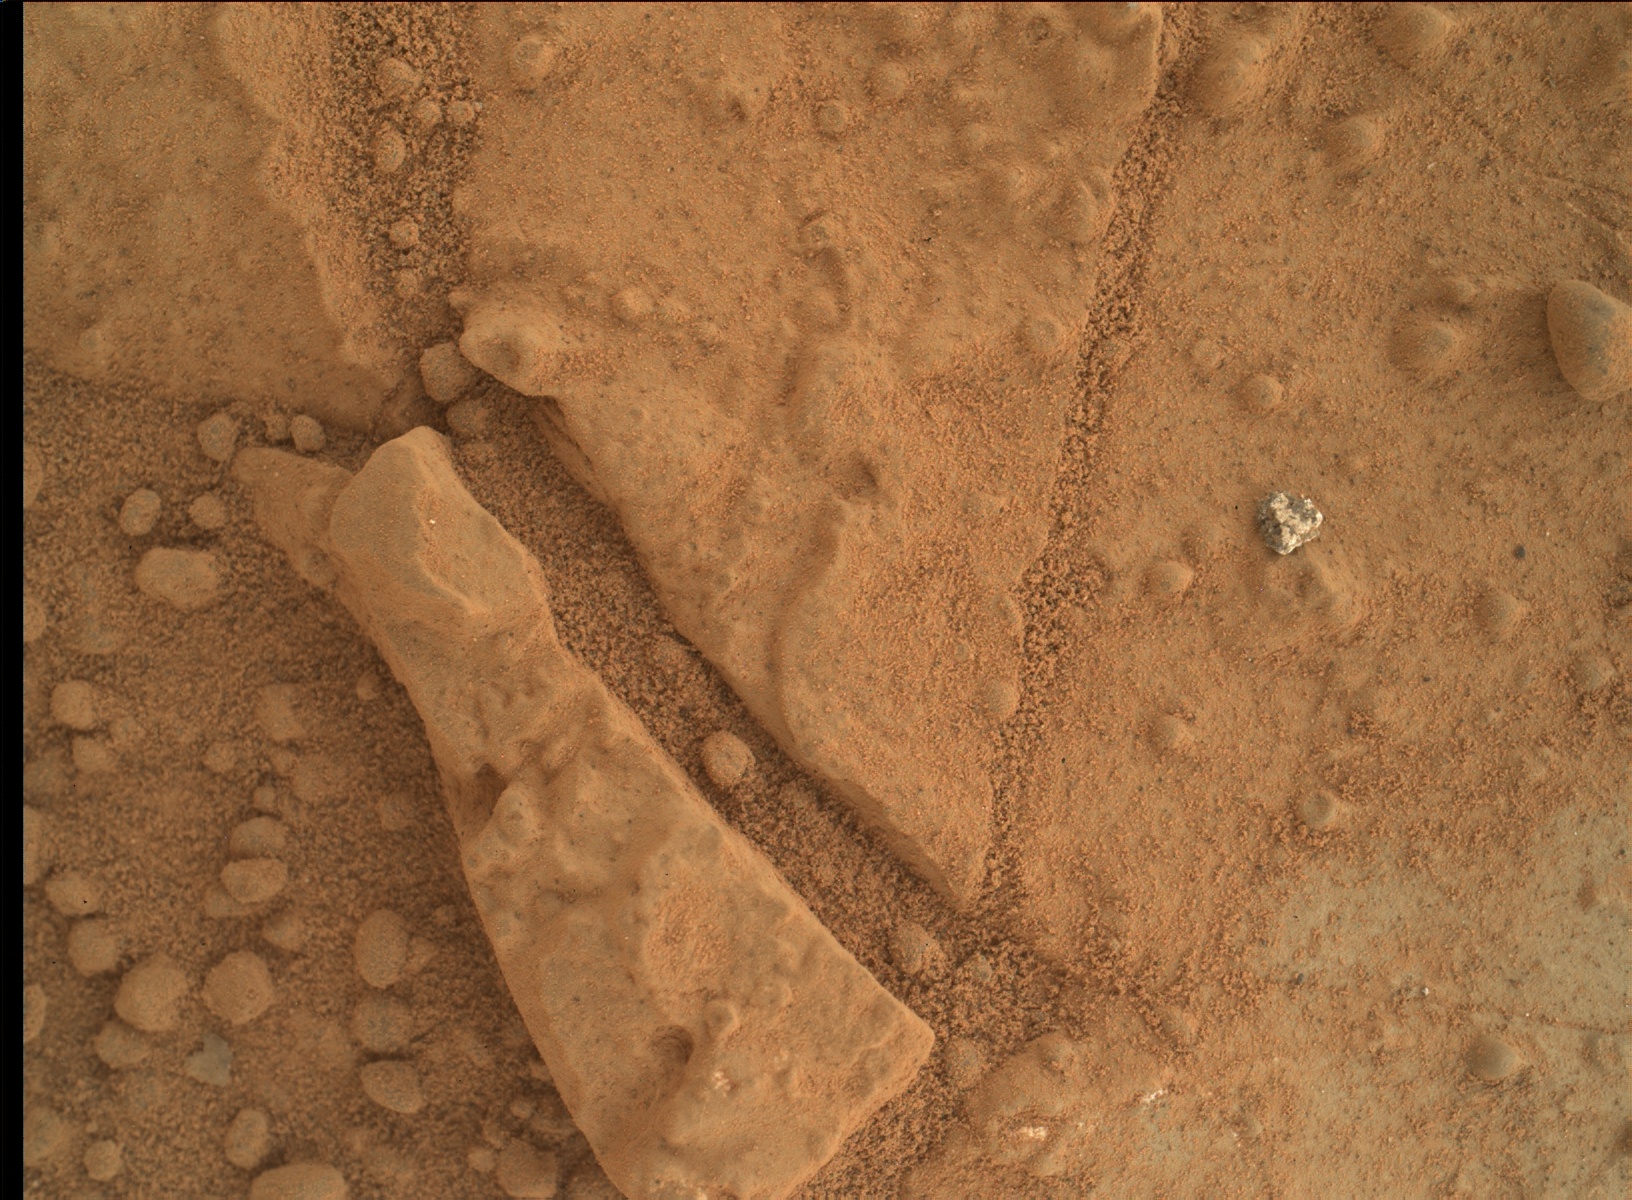 Nasa's Mars rover Curiosity acquired this image using its Mars Hand Lens Imager (MAHLI) on Sol 162